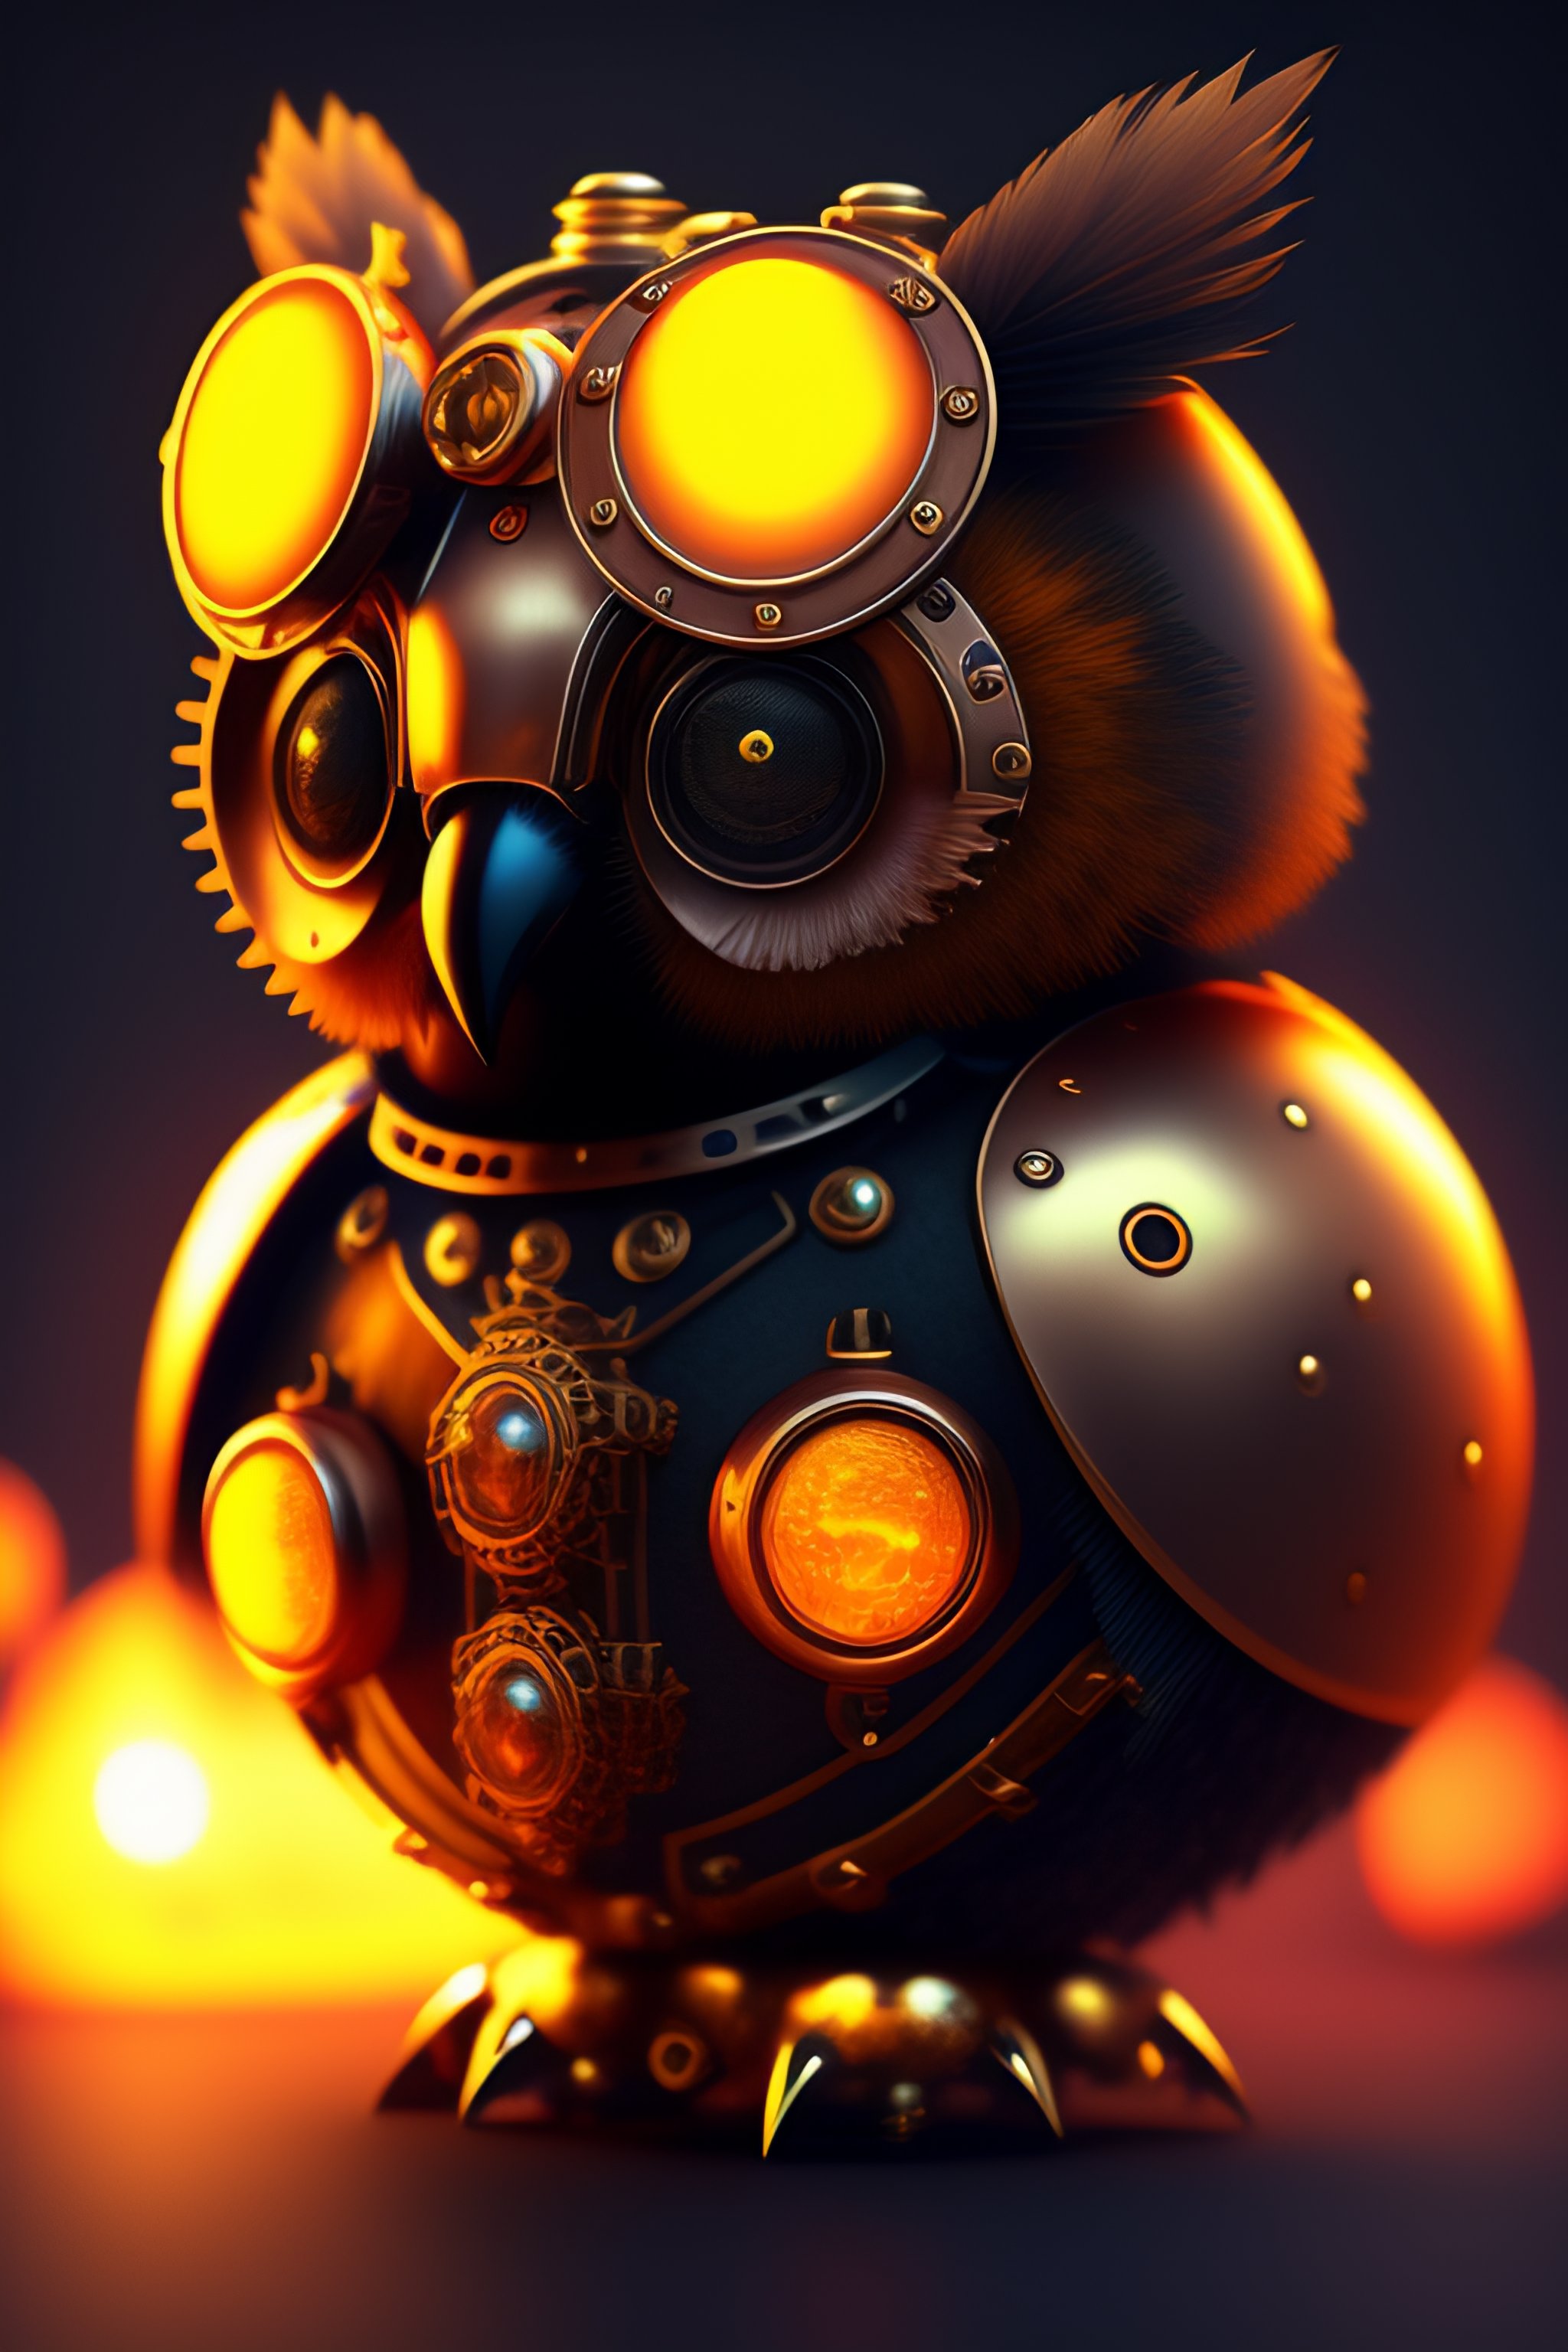 Lexica - A cute adorable portrait of a rusty and dirty steampunk clockwork  mechanical baby owl made of iron ball with low poly eye's surrounded by  gl...